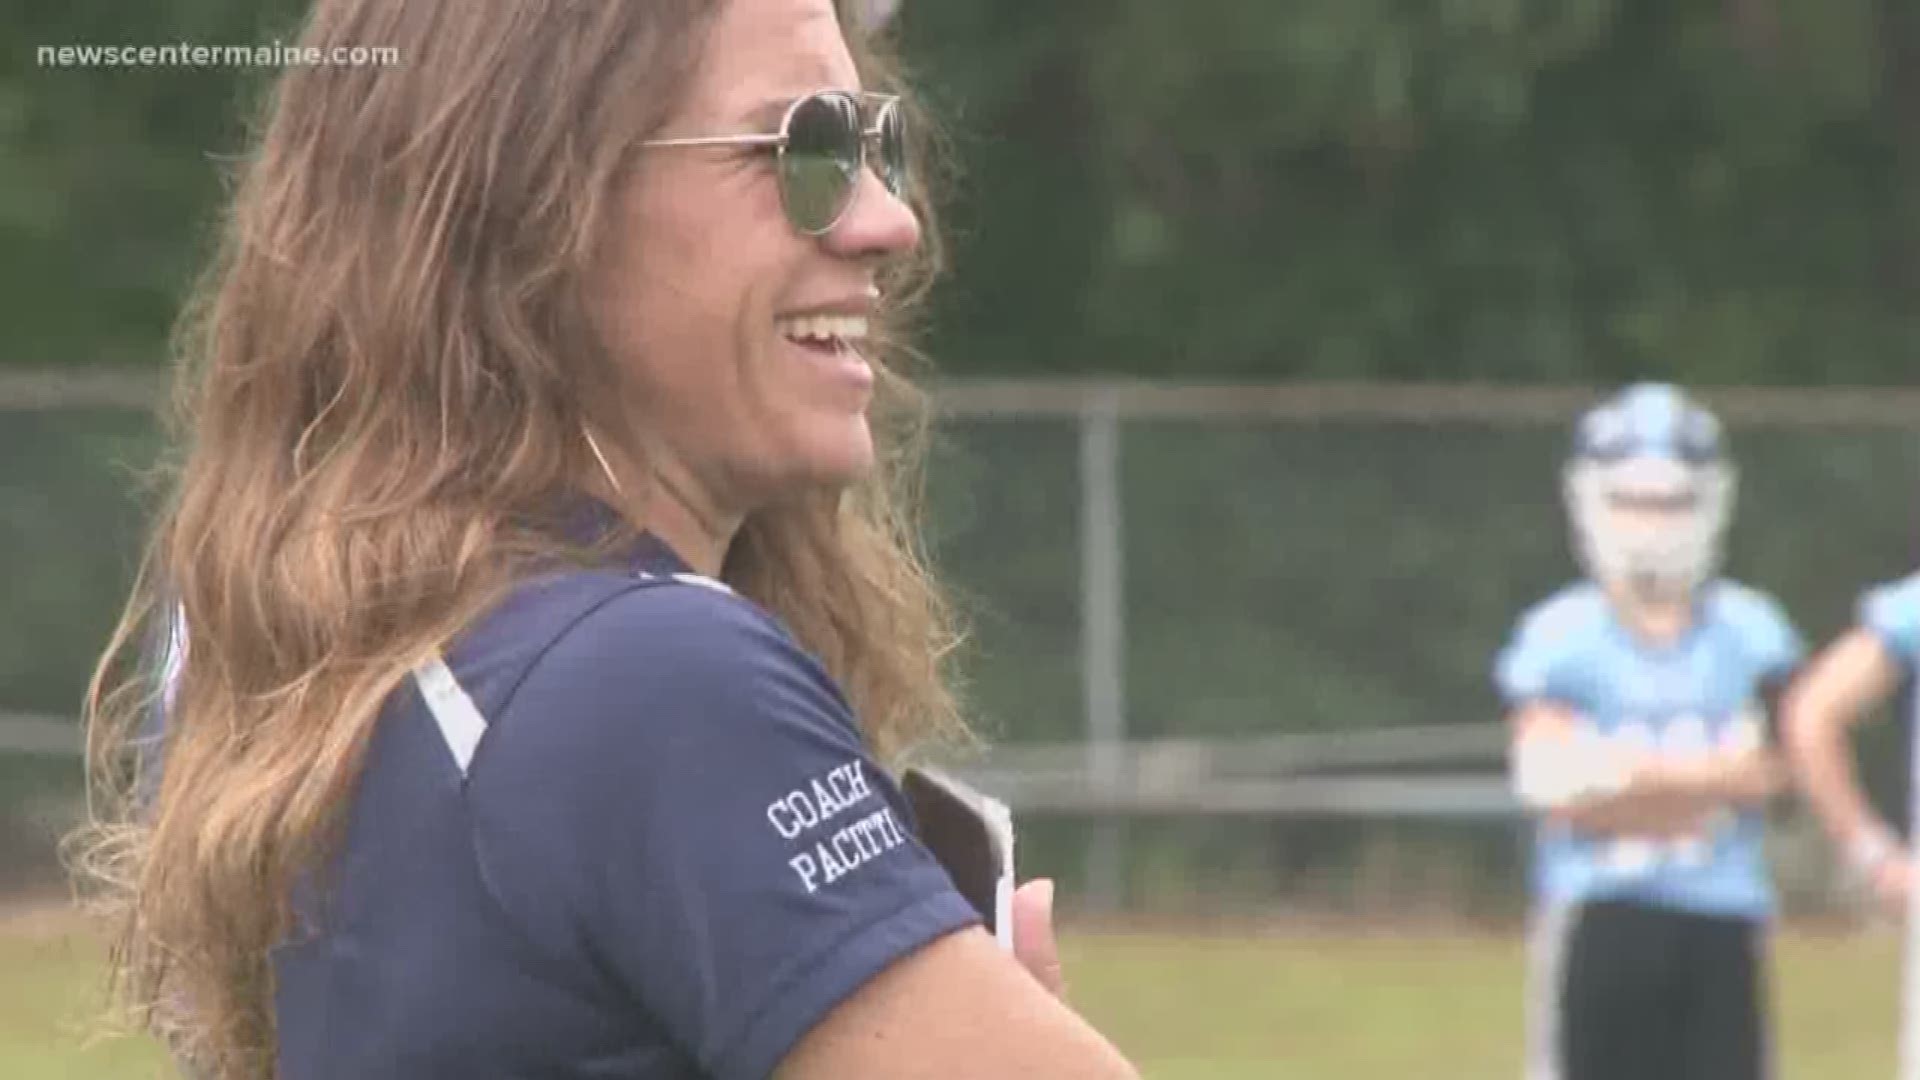 From player to coach, one York woman's journey